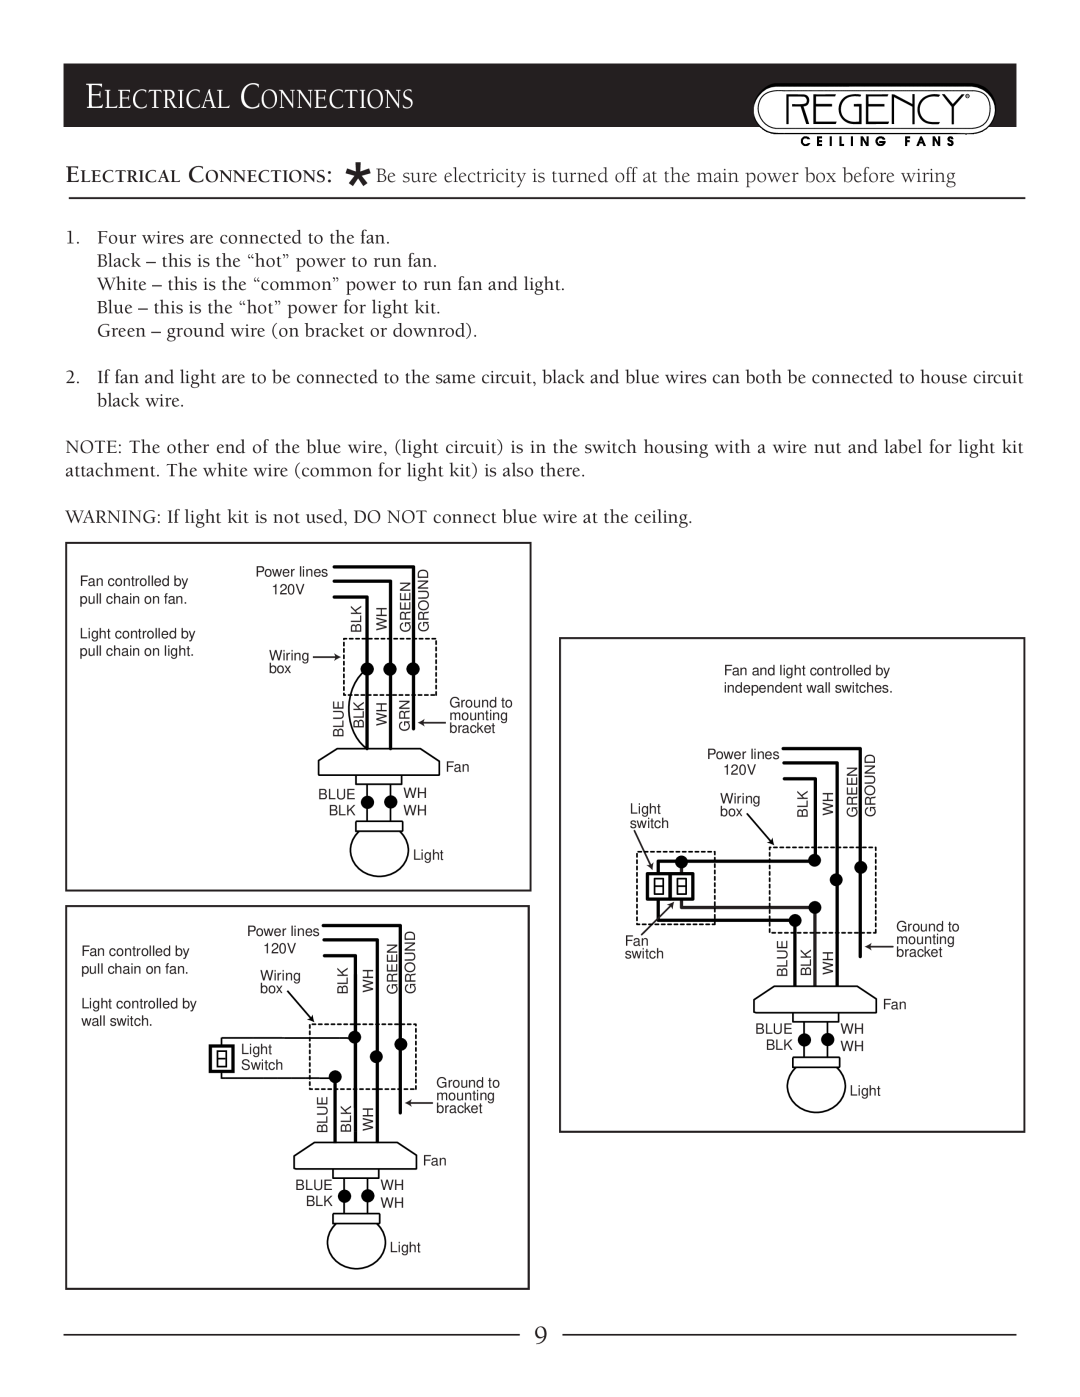 Marquis SERIES owner manual Electrical Connections 